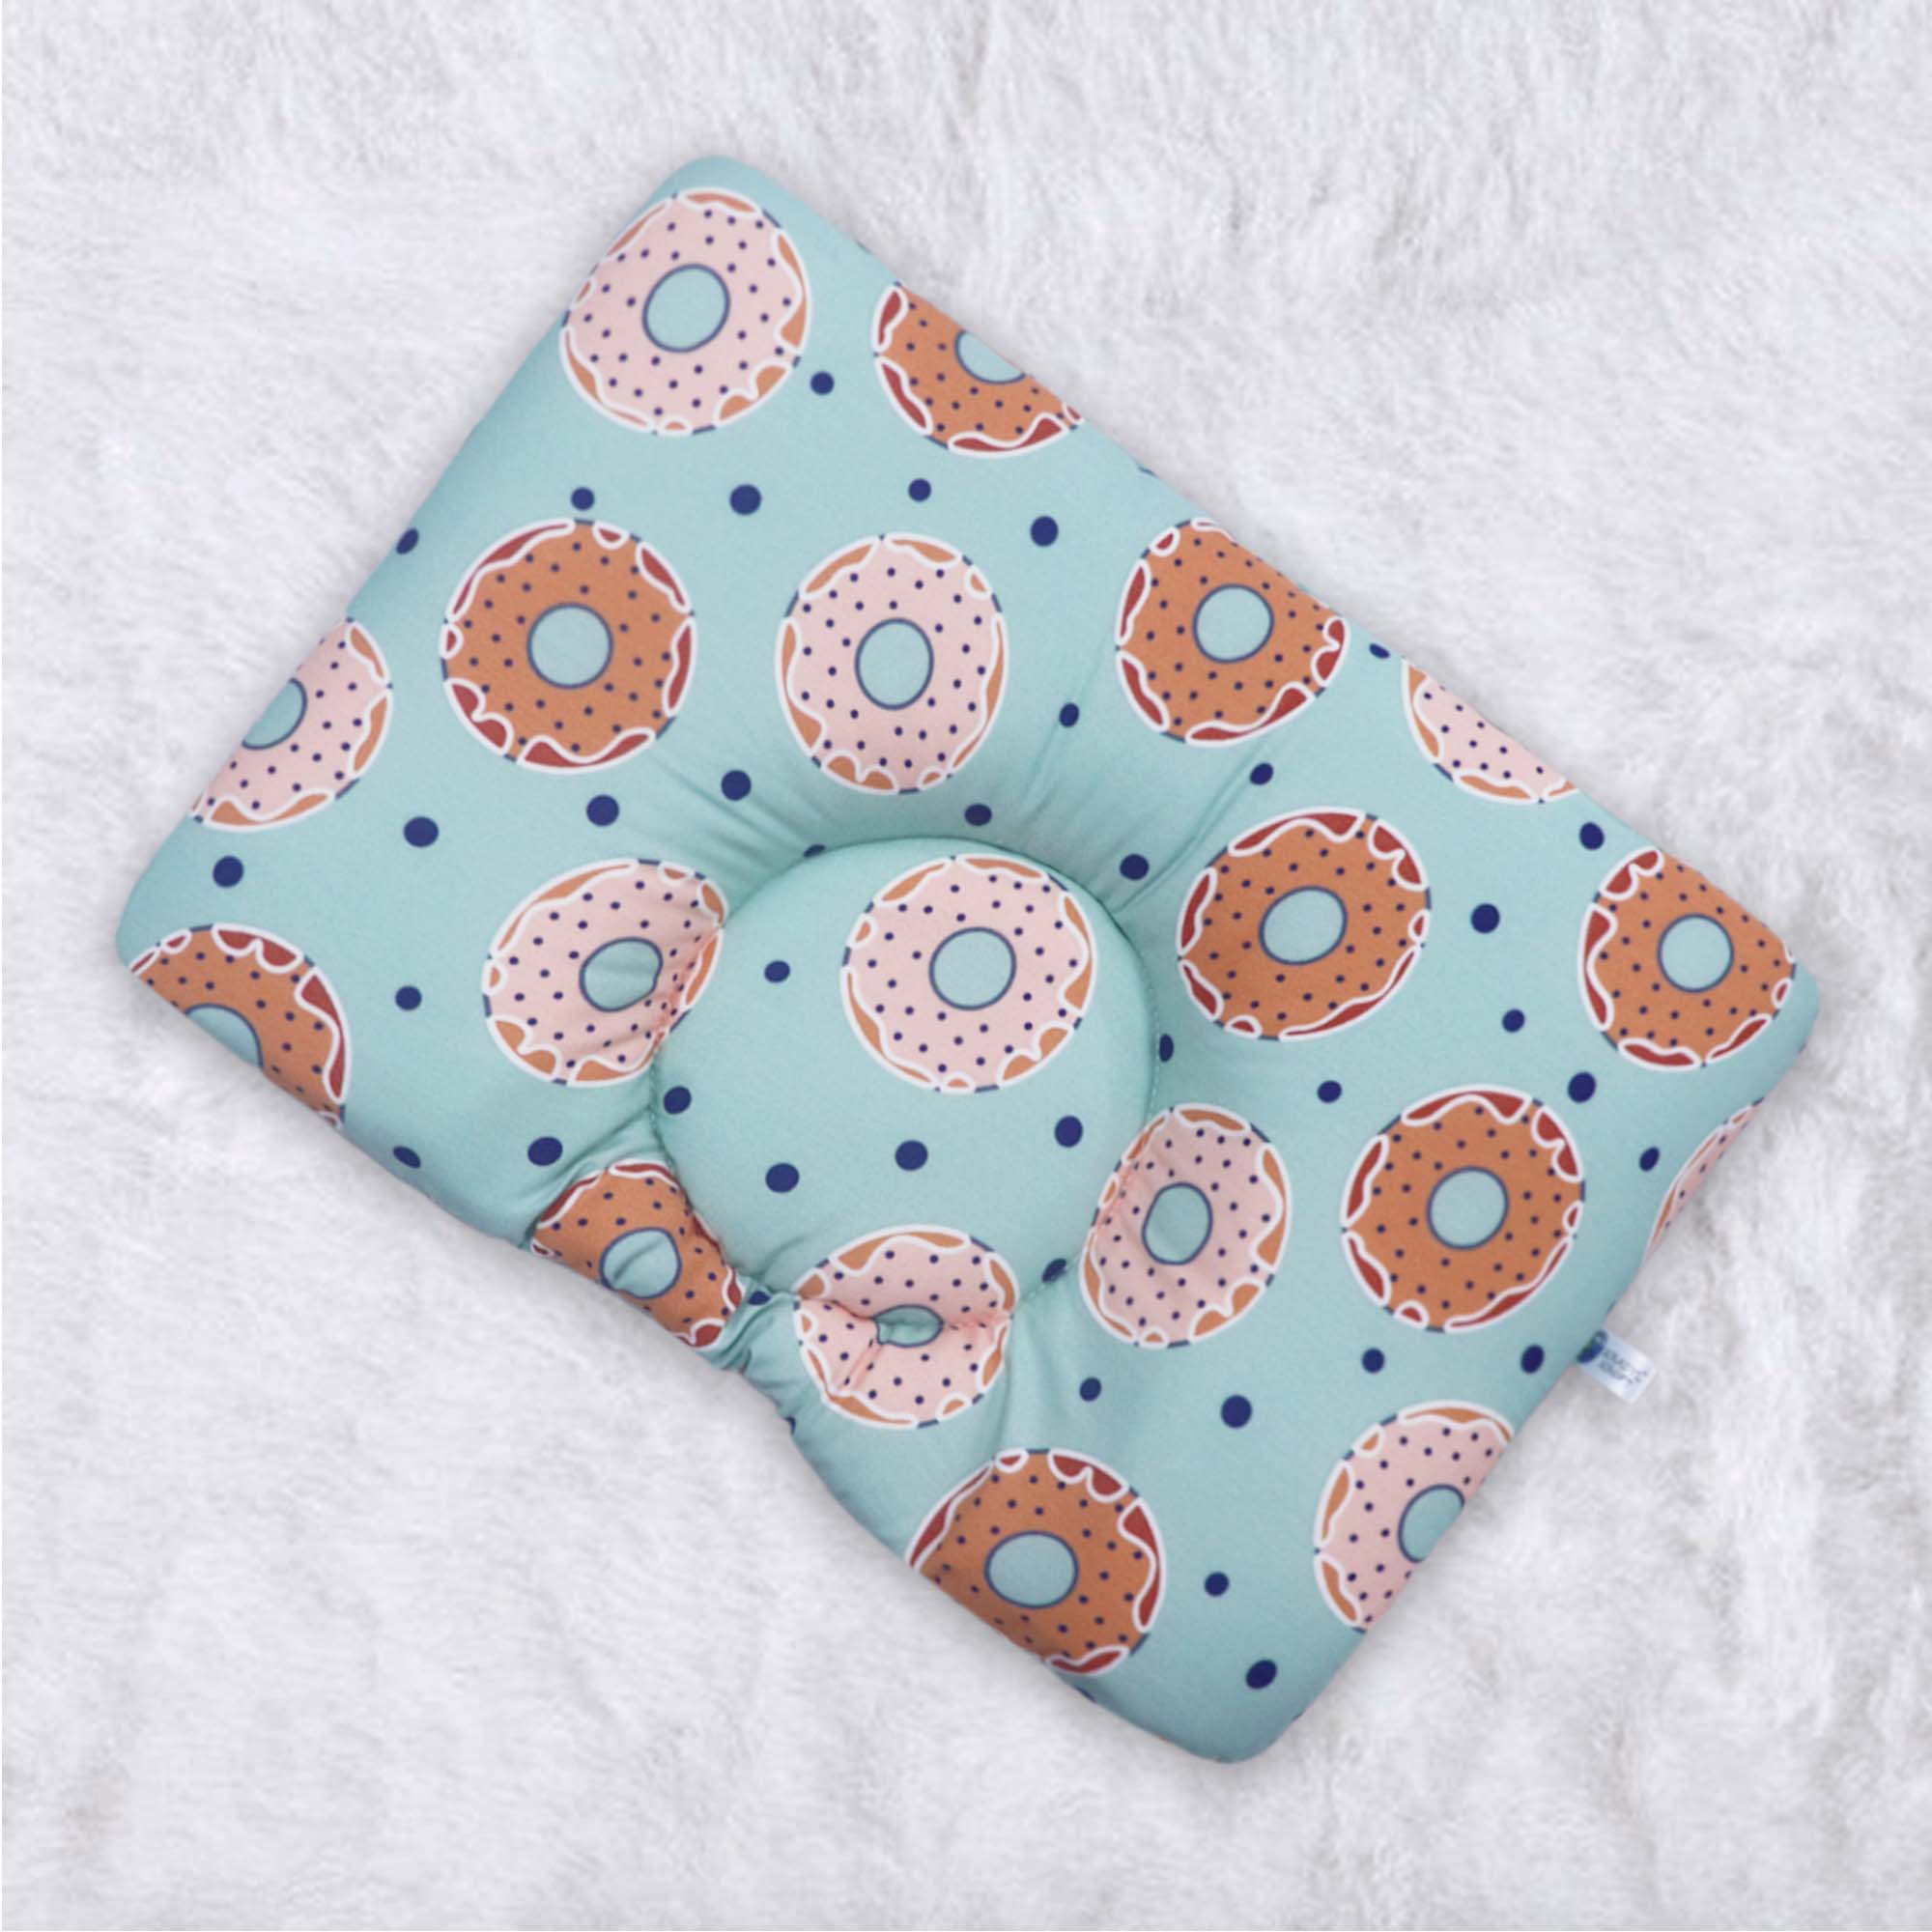 Donuts New Born Pillow | Baby Pillow | Head Shaping Pillow